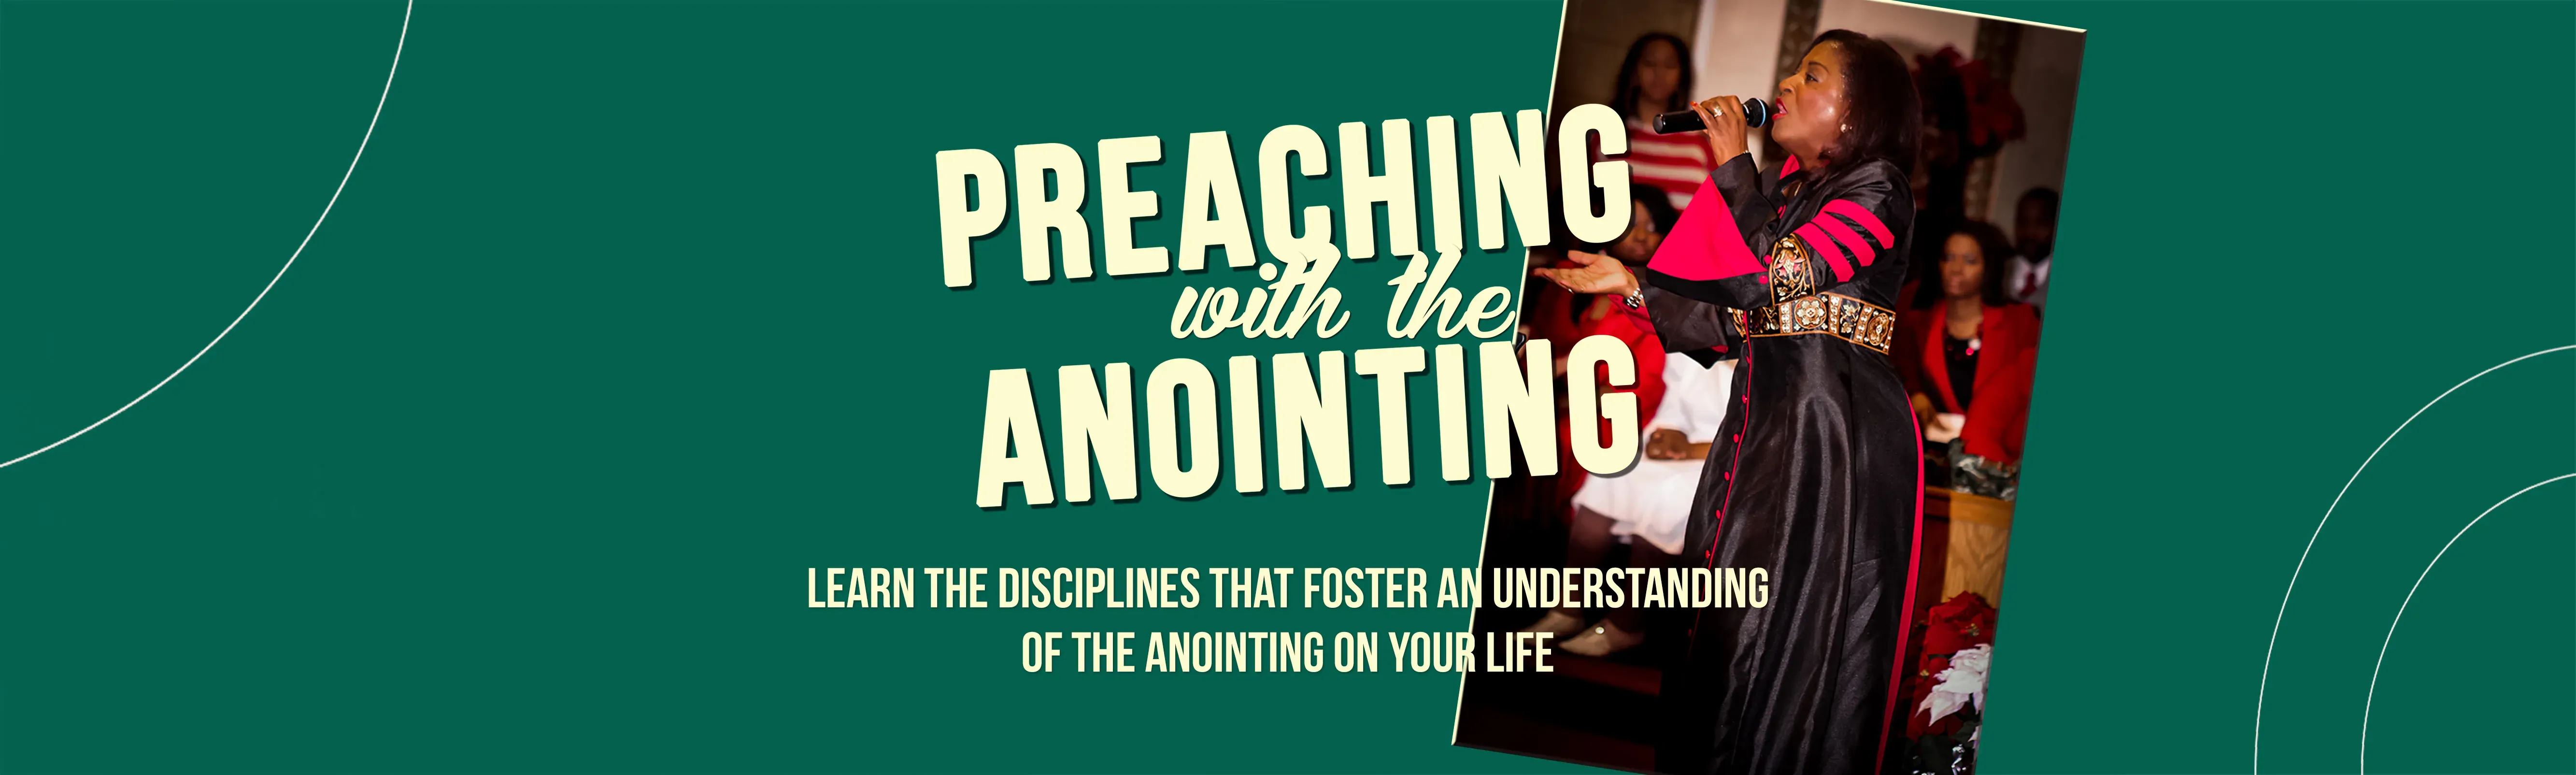 Preaching with Anointing banner